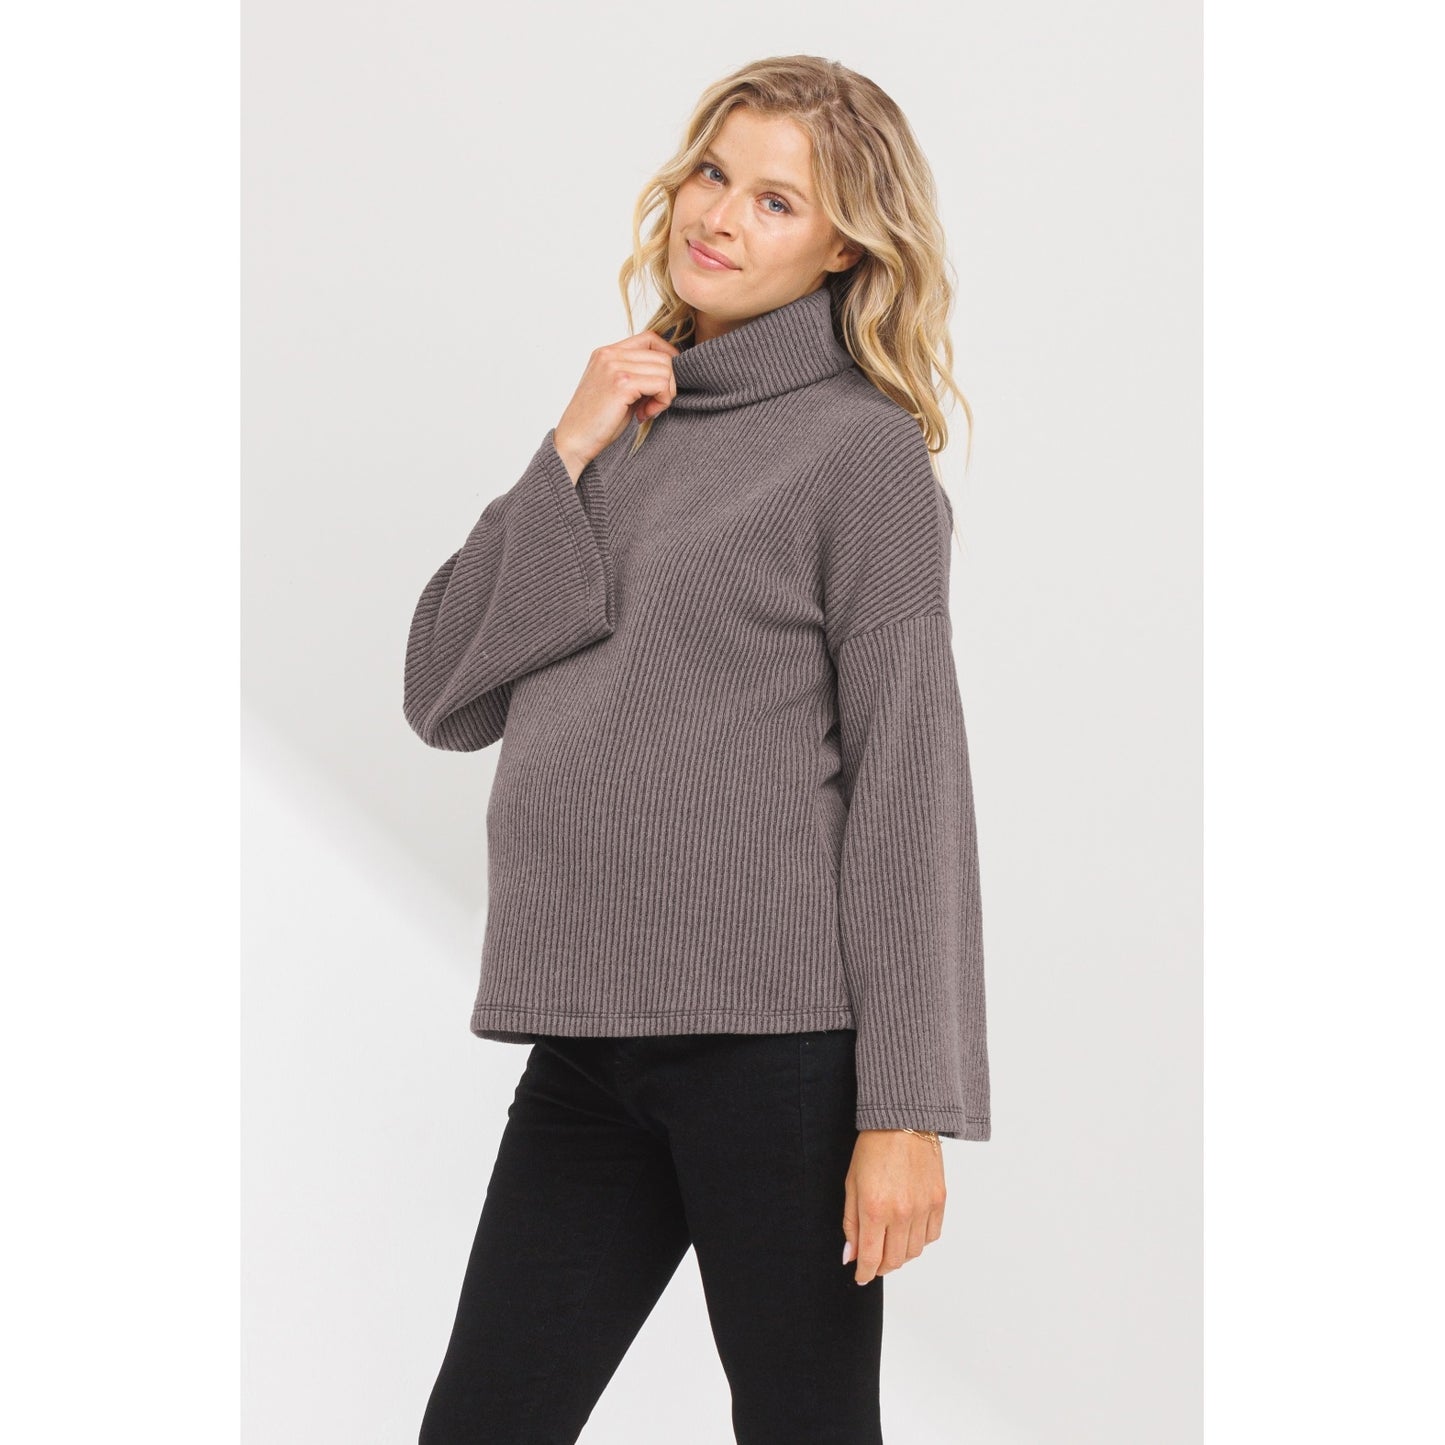 Turtle Neck Knit Sweater Maternity Top     +colors